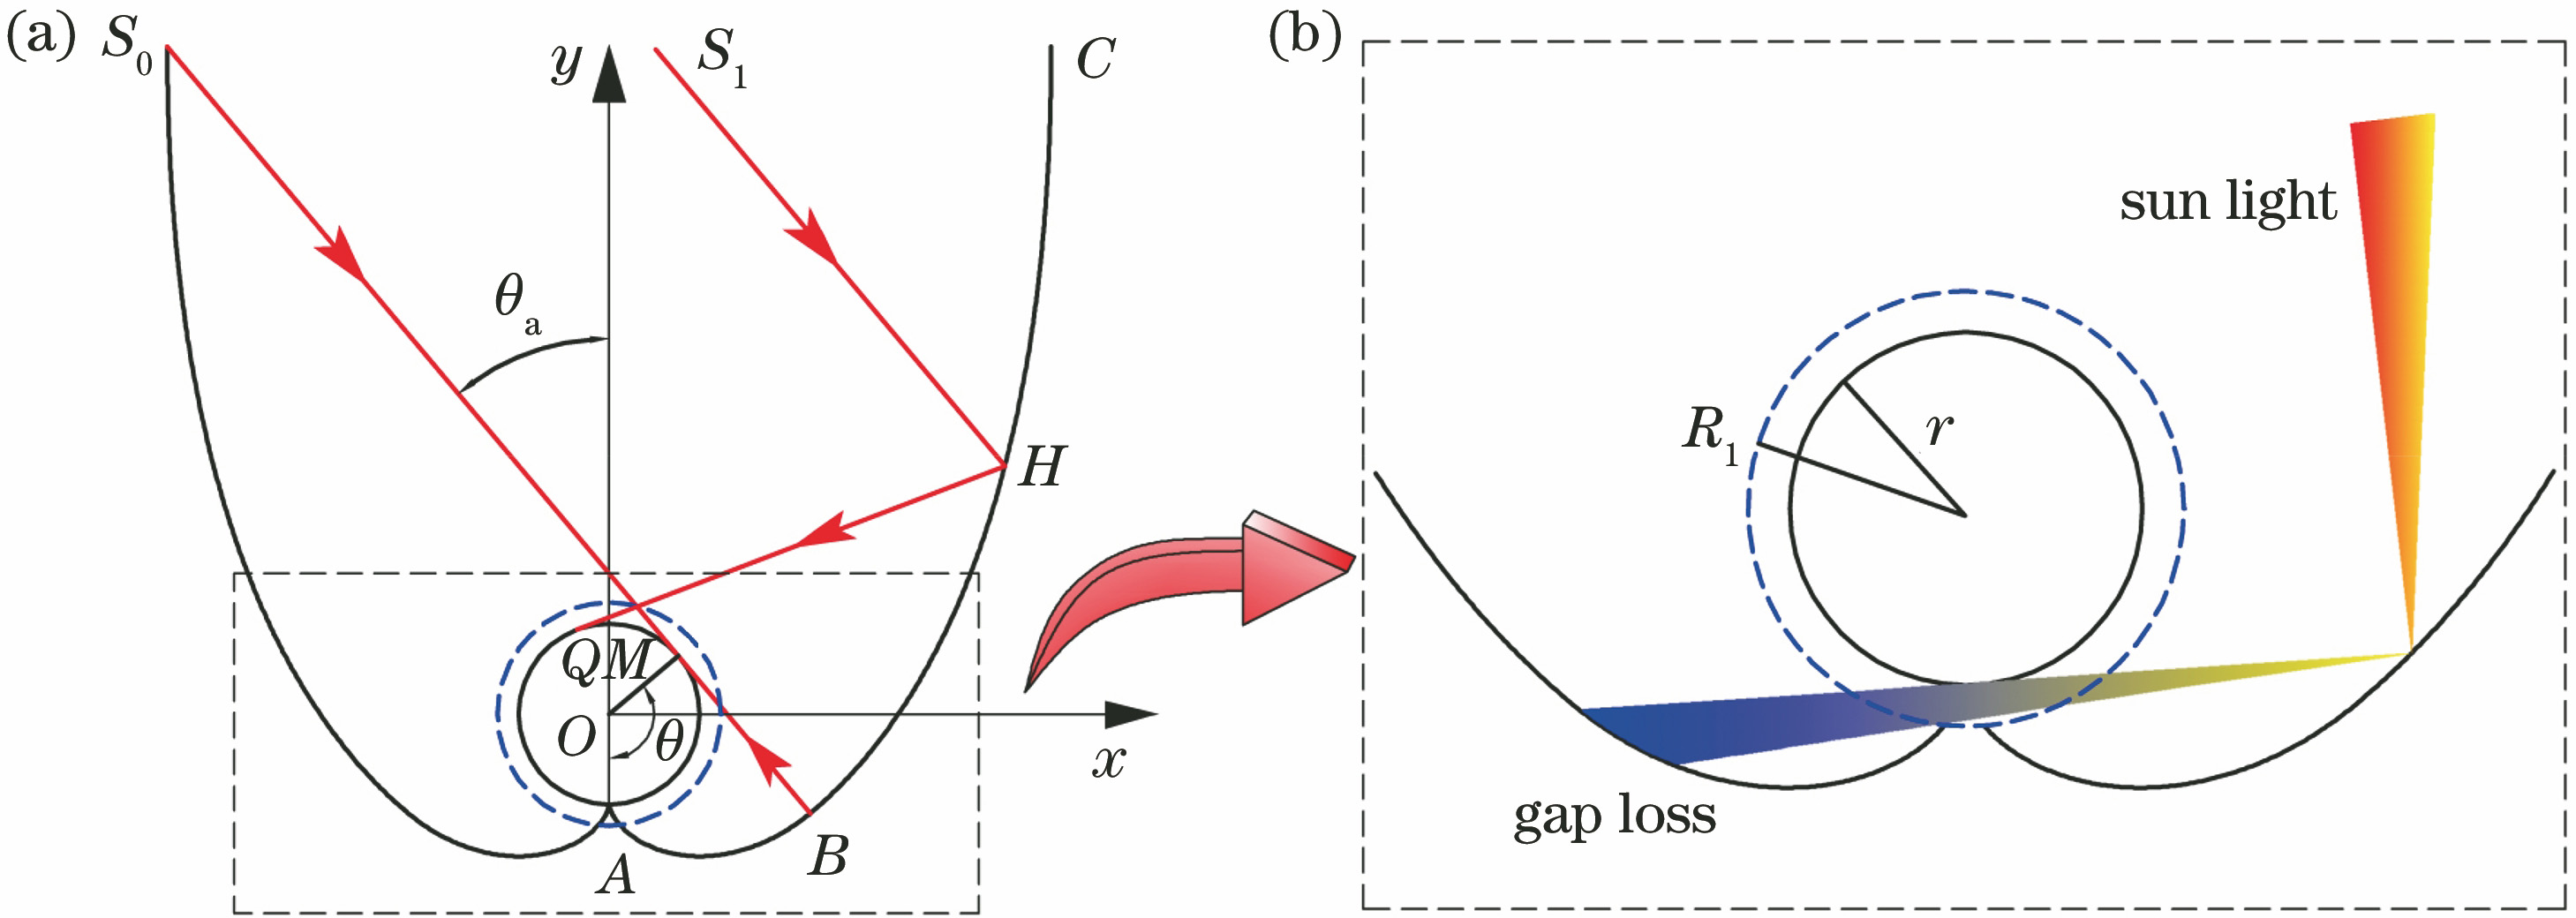 Model diagram and gap loss of S-CPC. (a) Cross-sectional view of physical model; (b) gap loss of S-CPC